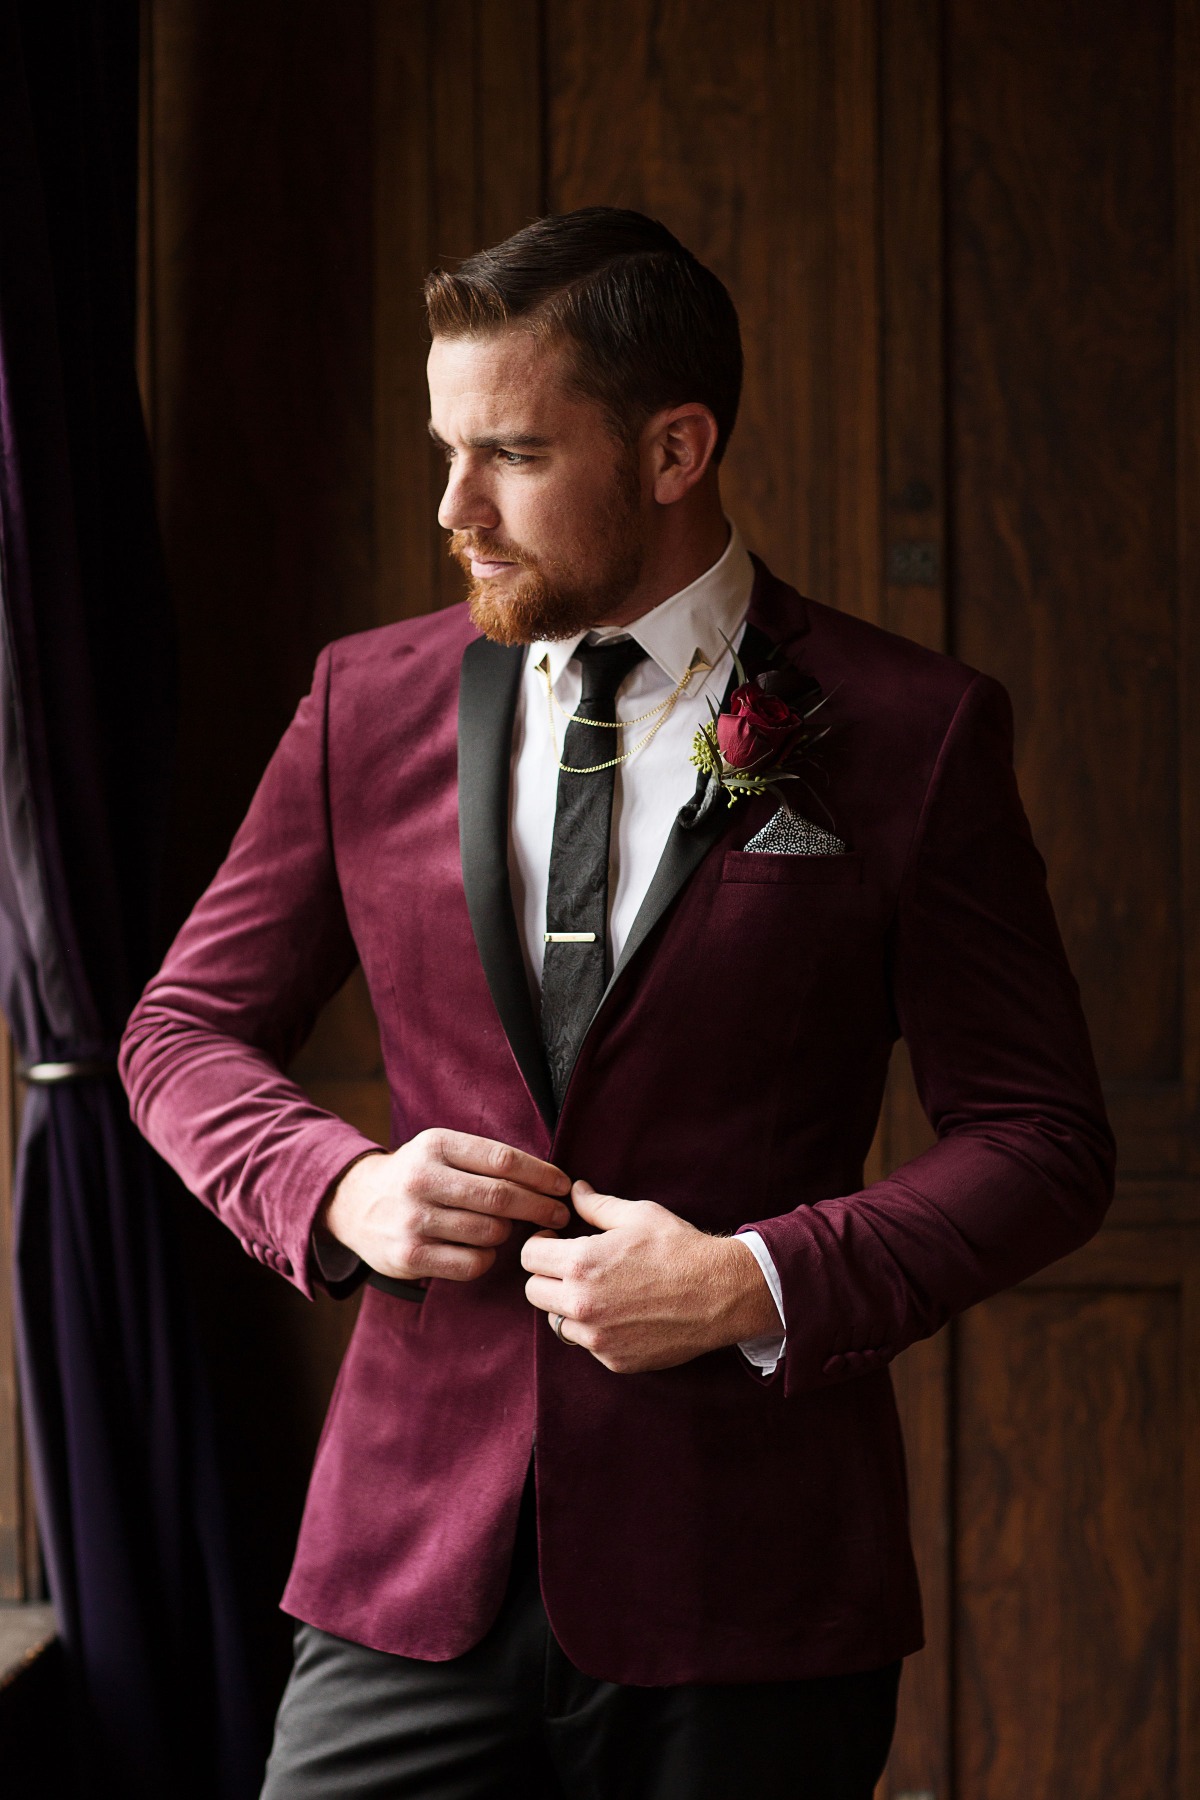 Burgundy groom's suit for fall